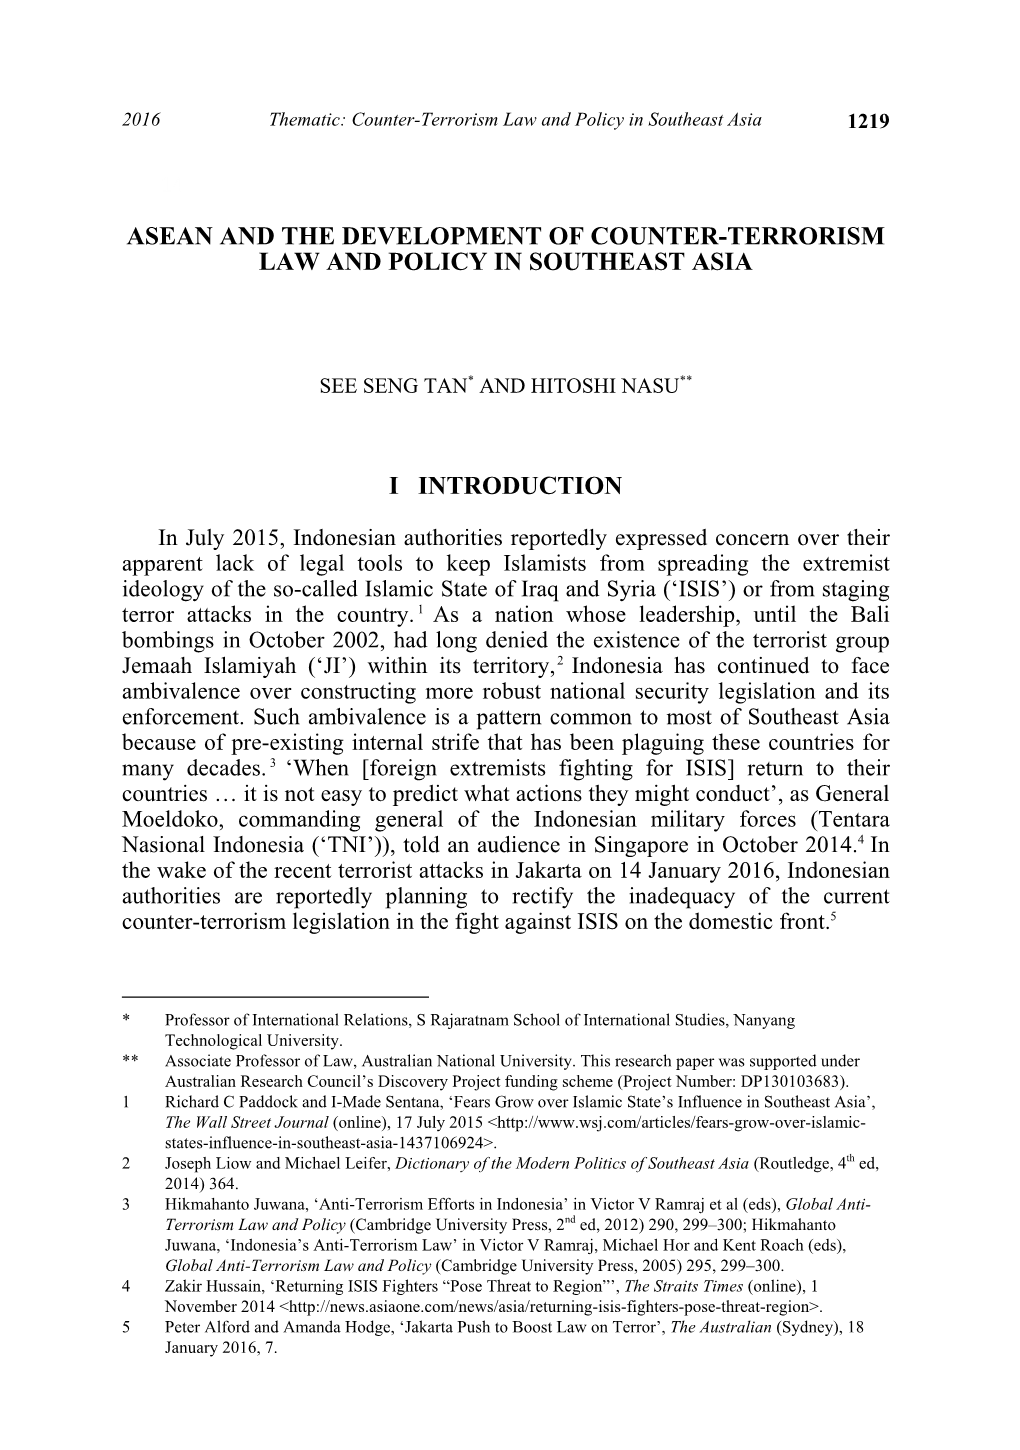 Asean and the Development of Counter-Terrorism Law and Policy in Southeast Asia